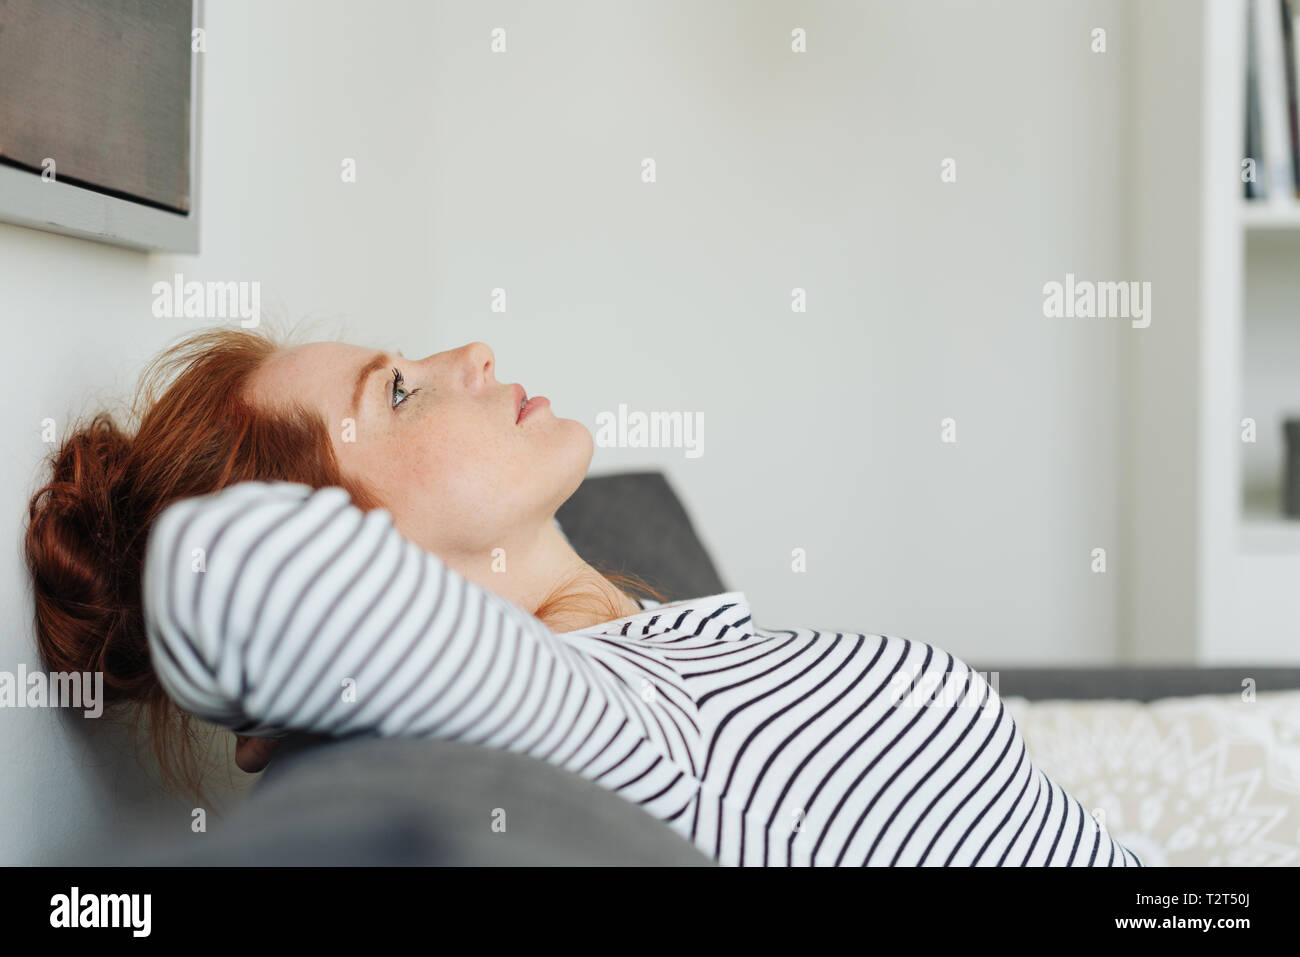 Young Woman Deep In Thought Relaxing On A Sofa With Her Head